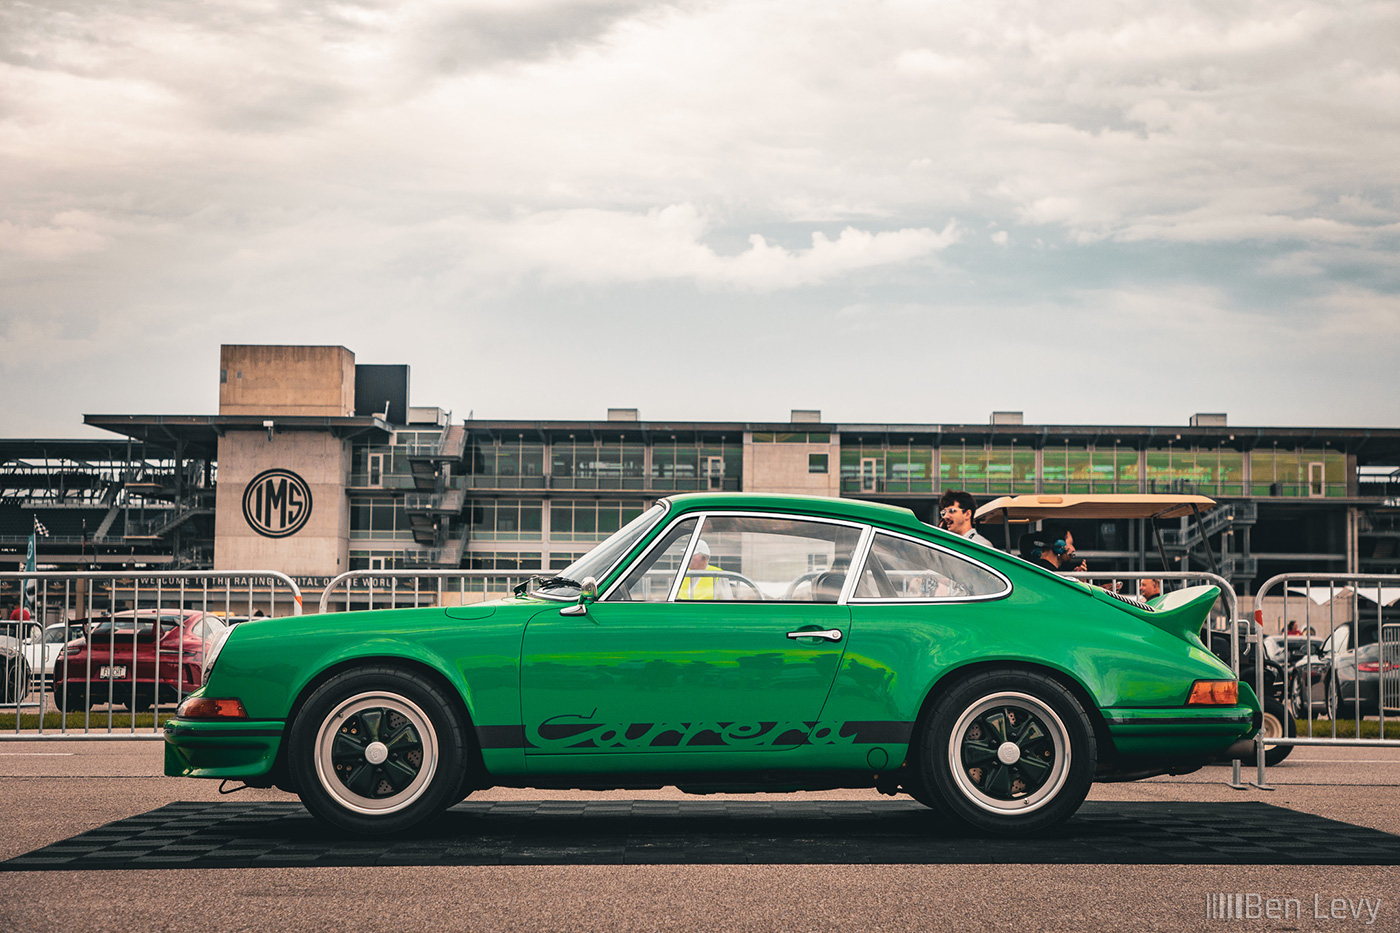 Green Porsche 911 Carrera RS 2.7 at Indiana Motor Speedway for Sports Car Together Fest